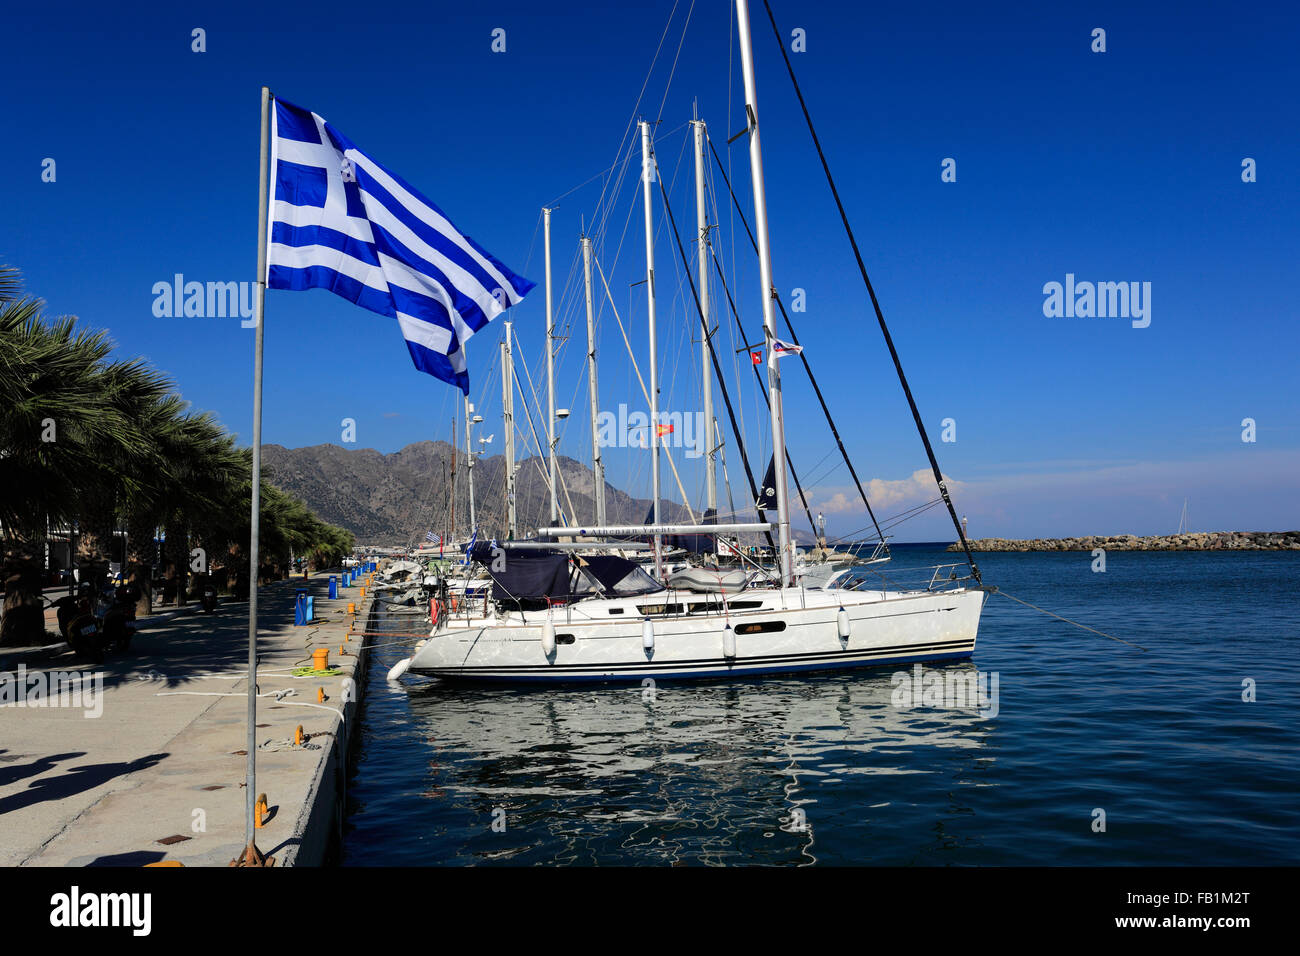 Sailing and fishing boats in Kardamena village harbour, Kos Island, Dodecanese group of islands, South Aegean Sea, Greece. Stock Photo